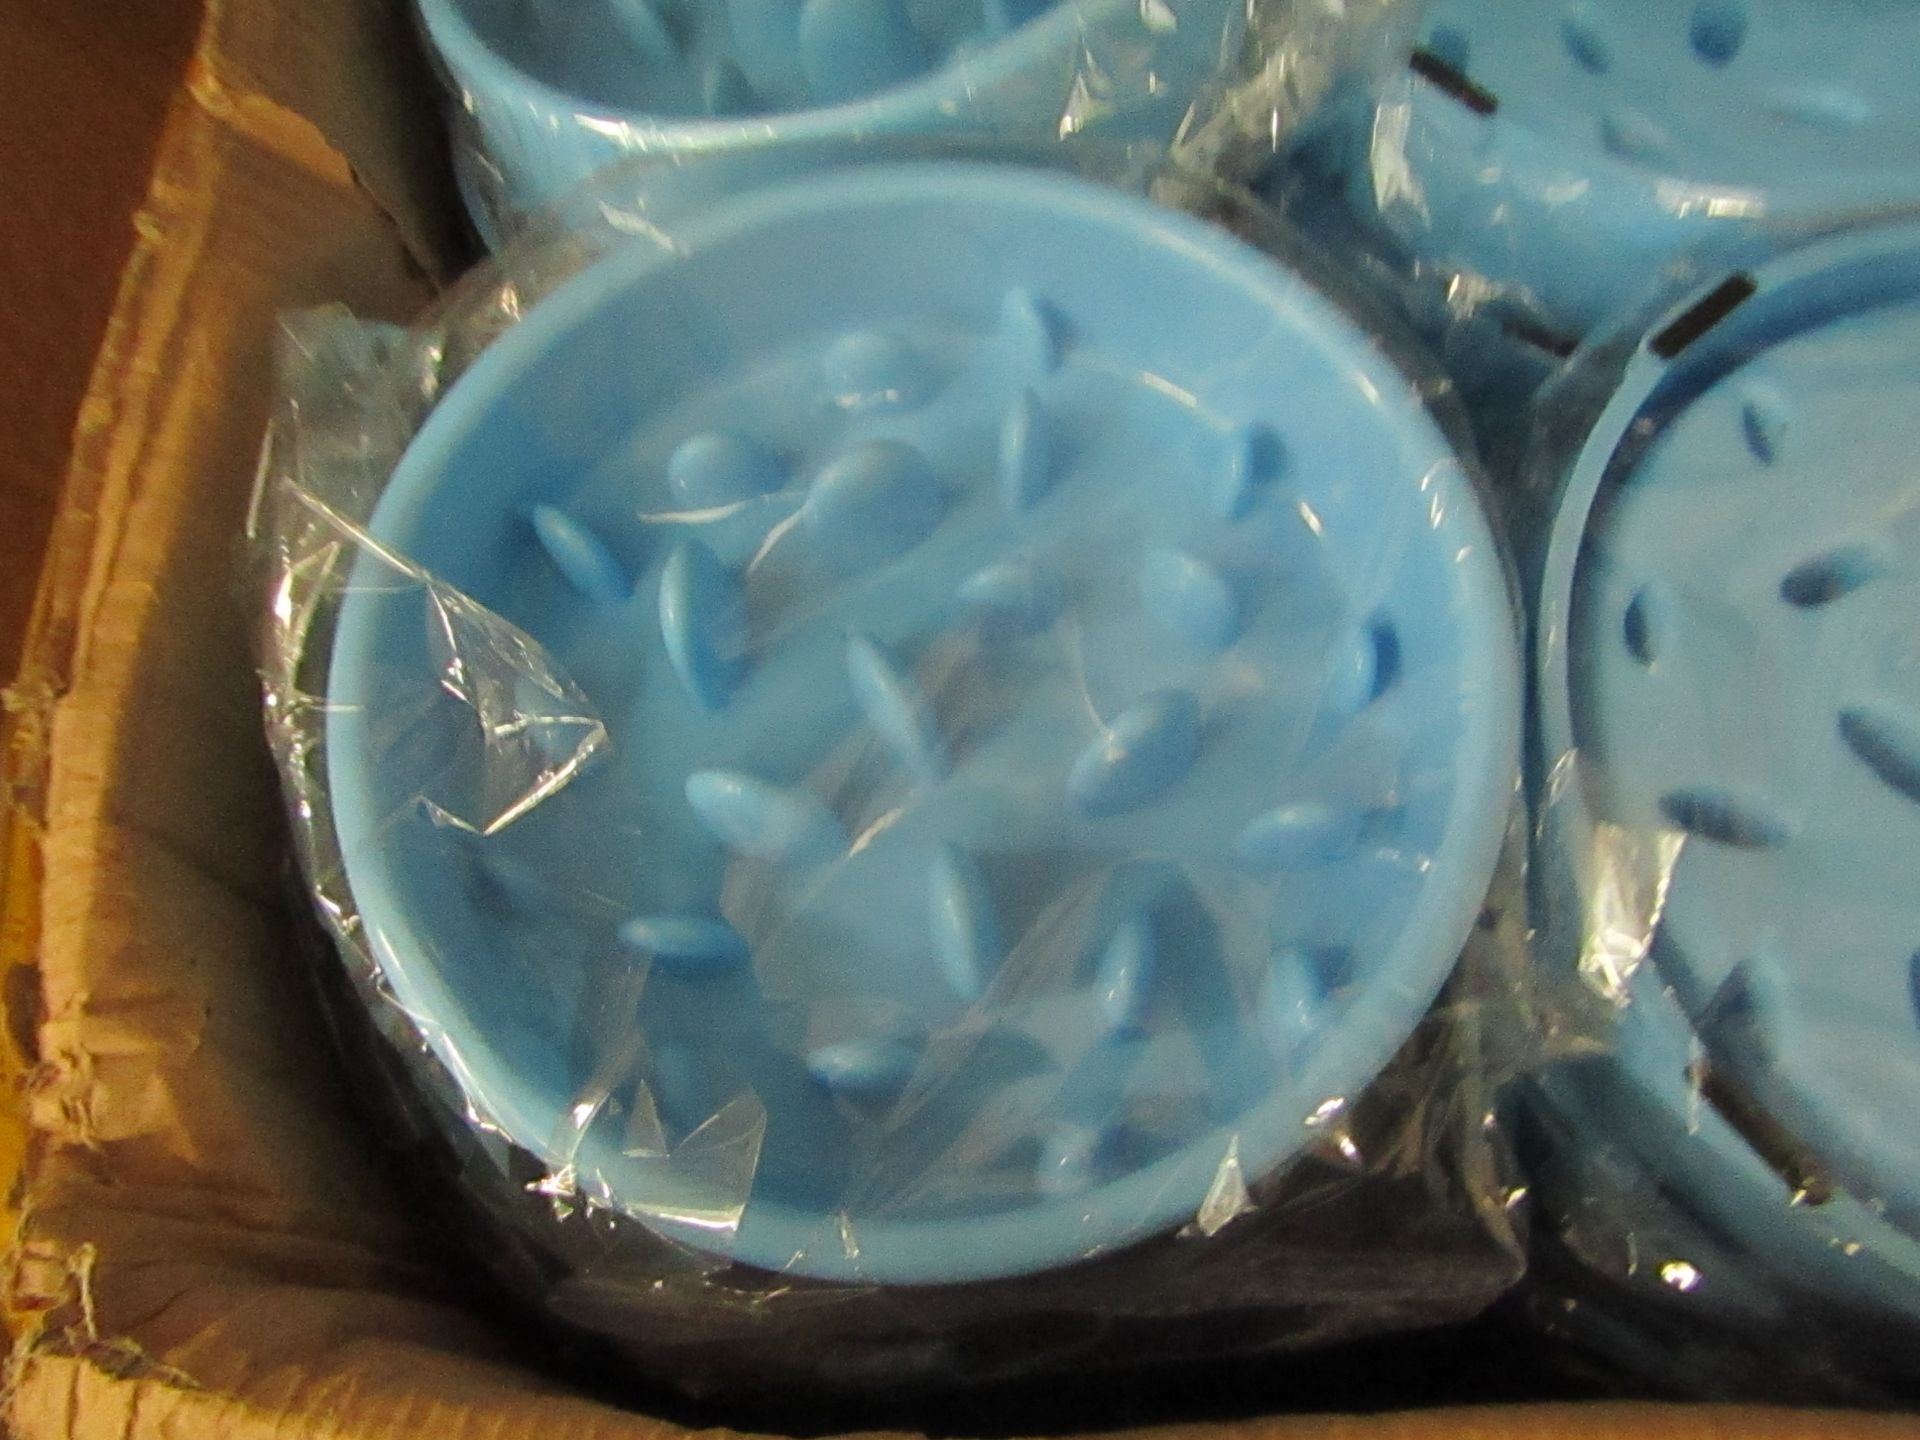 10 x Slow Feed Dog Bowls. New & Packaged. RRP £6.99 Each